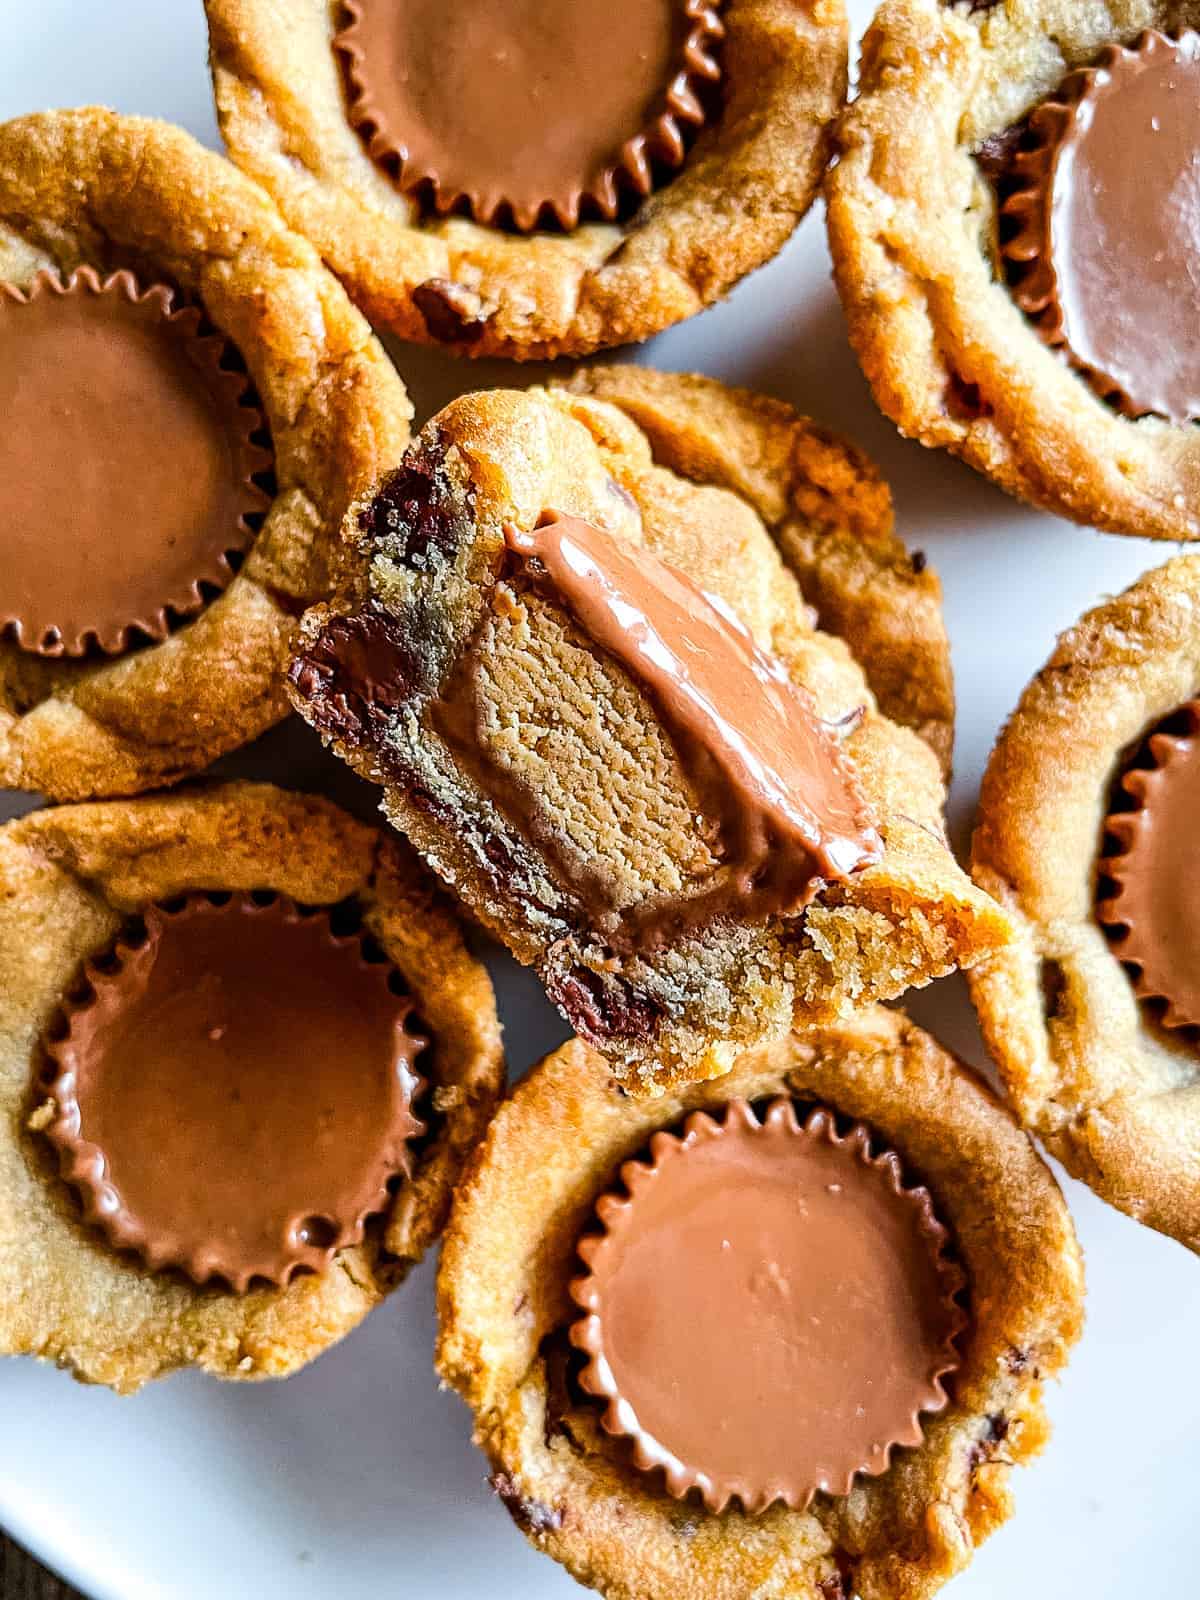 Chocolate chip peanut butter cup cookies on a white plate. One cookie is cut in half to show the peanut butter cup filling.